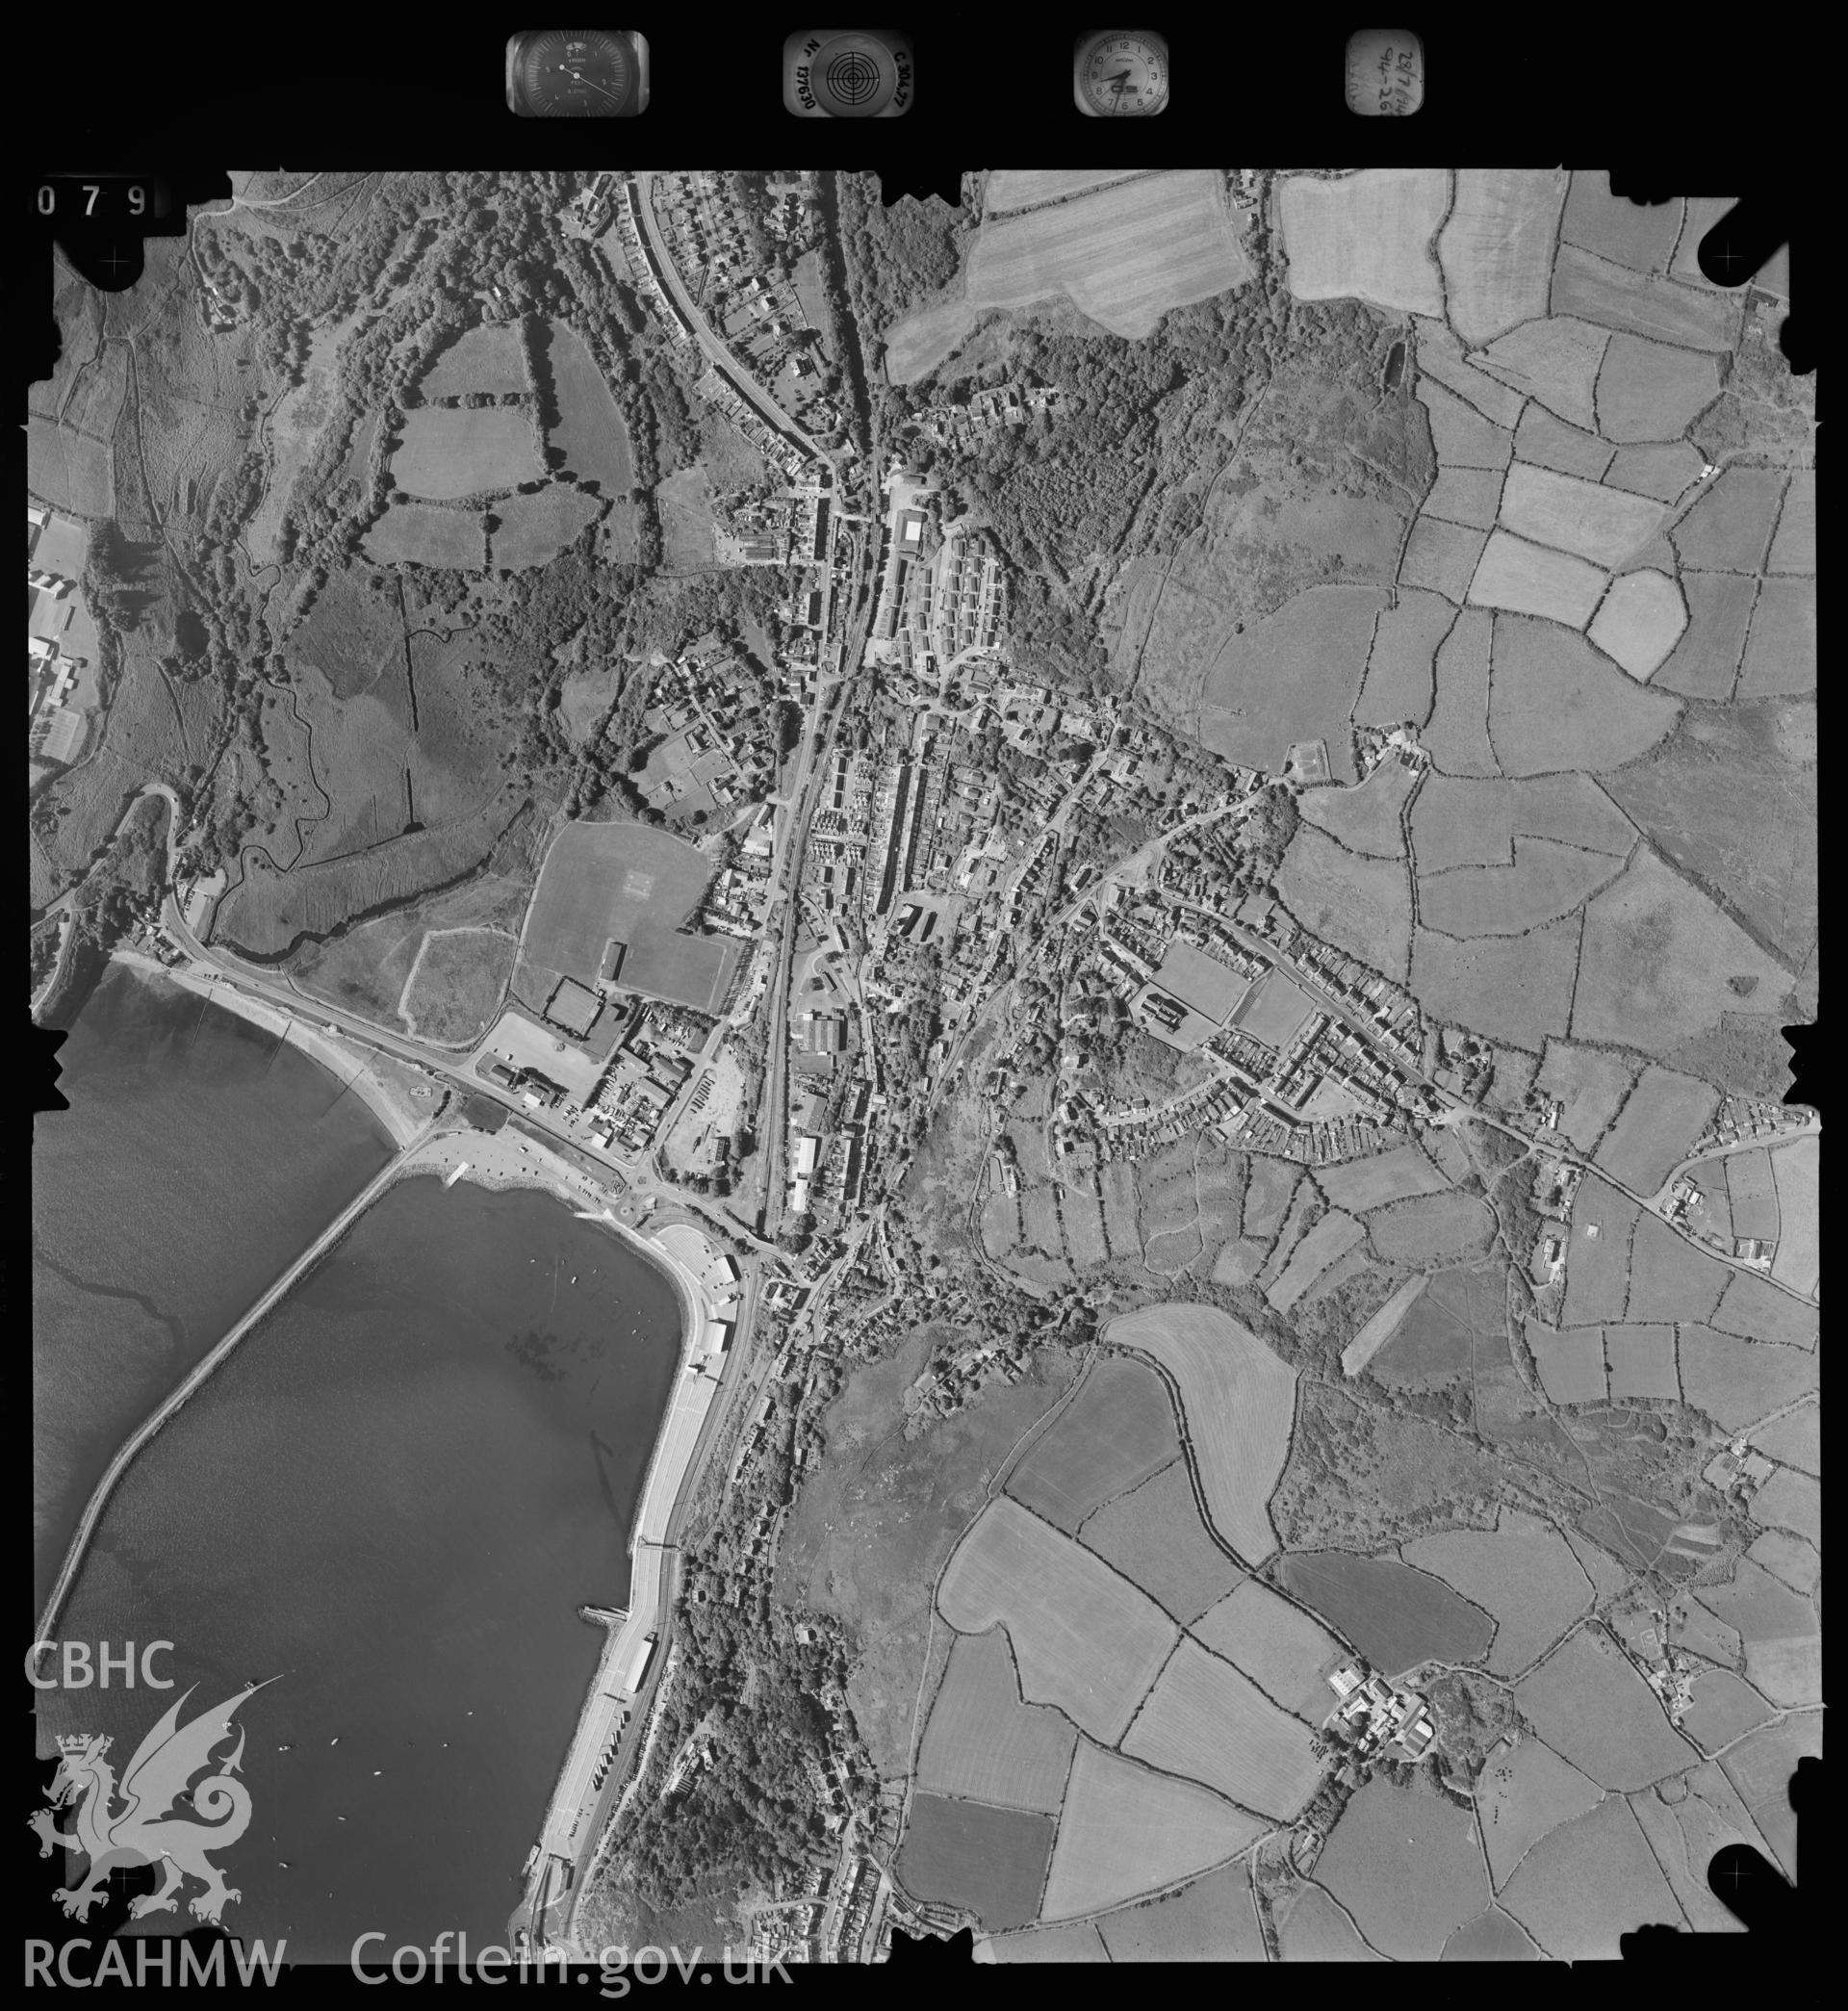 Digitized copy of an aerial photograph showing the Goodwick area taken by Ordnance Survey, 1994